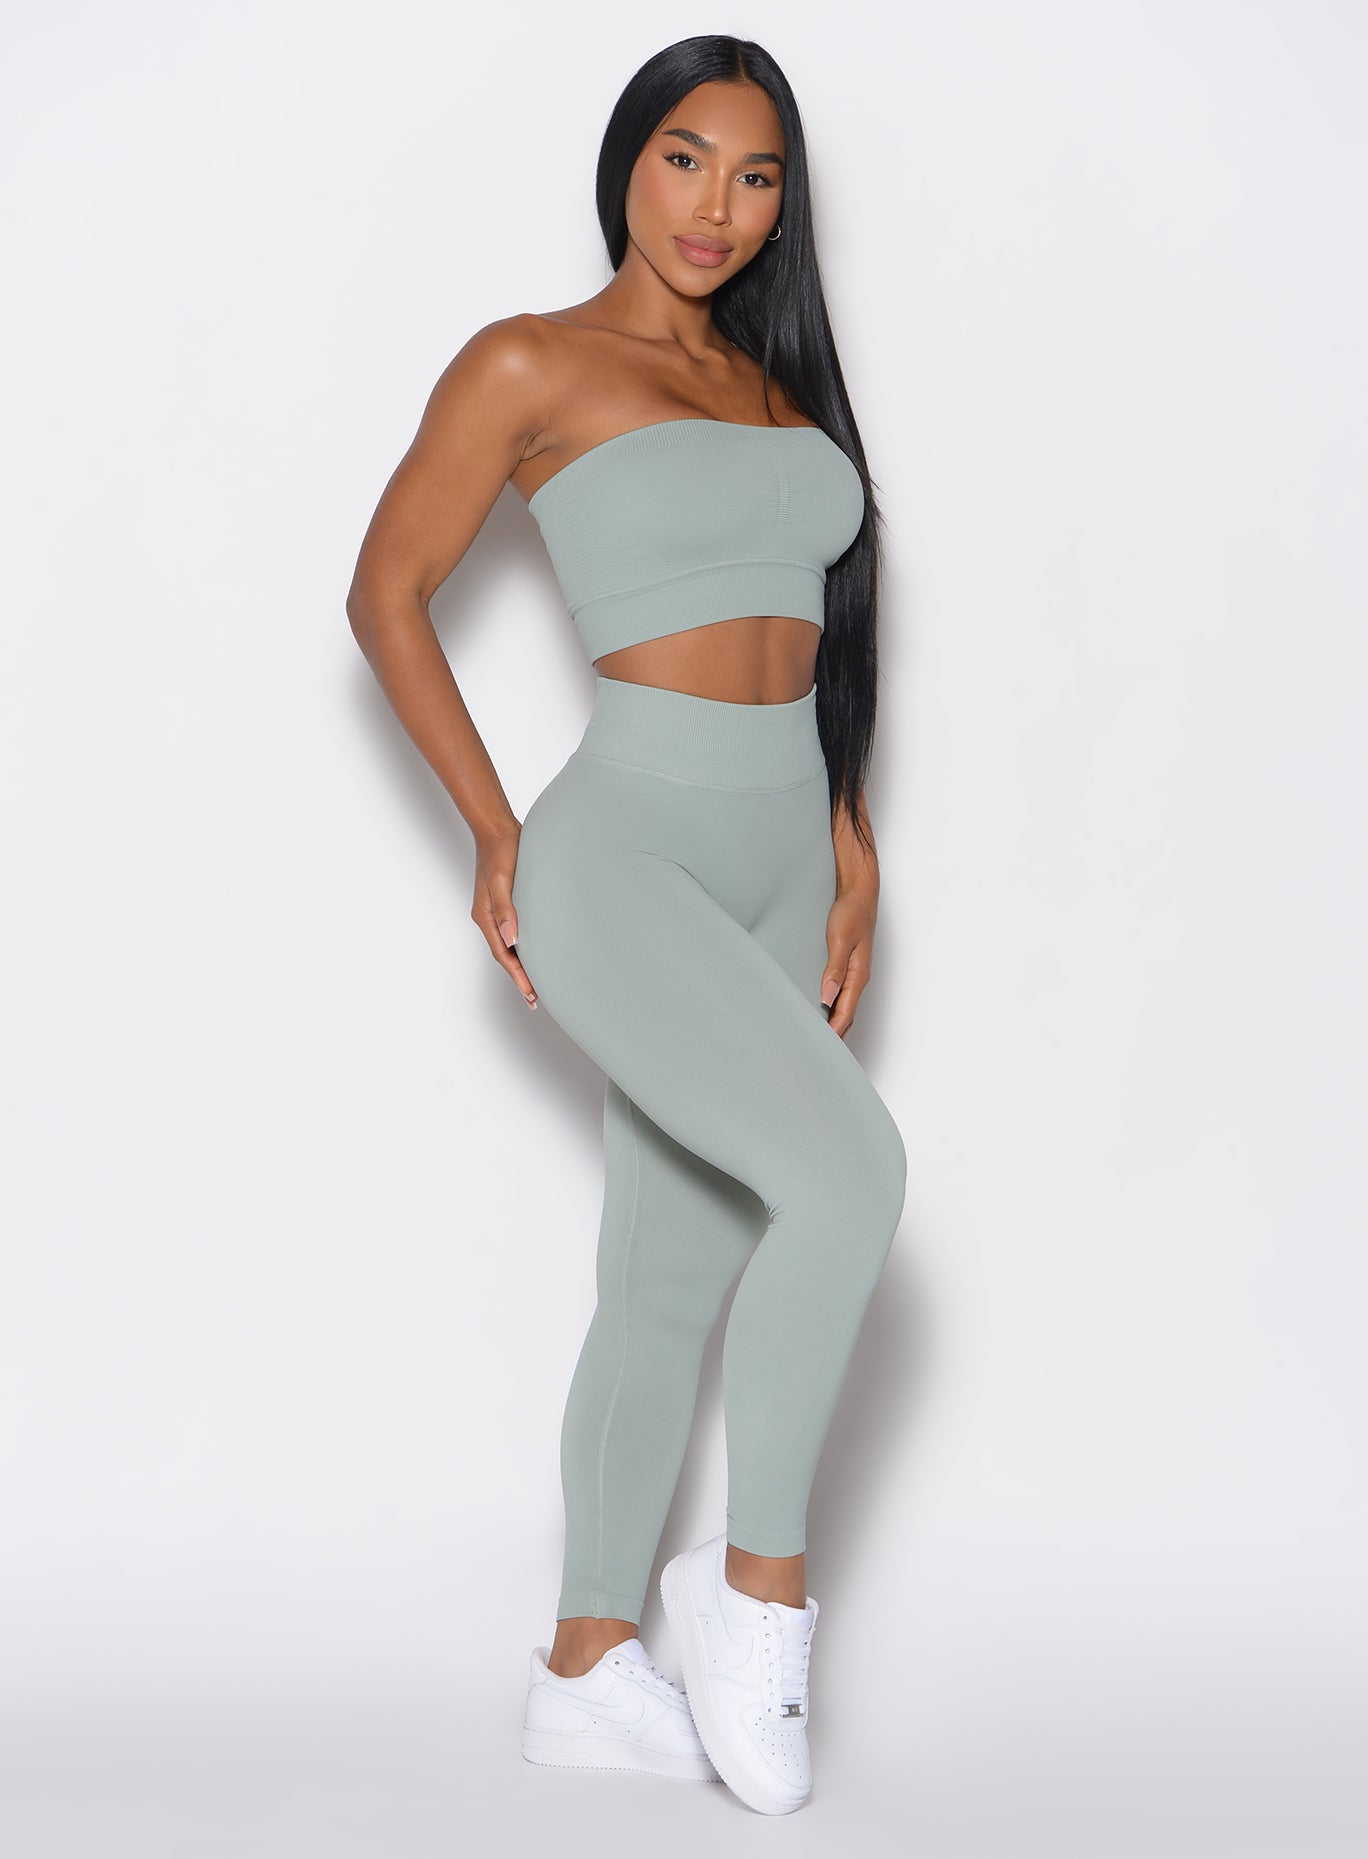 right side profile view of a model angled right wearing our cheeky seamless leggings in light jade color along with the matching top